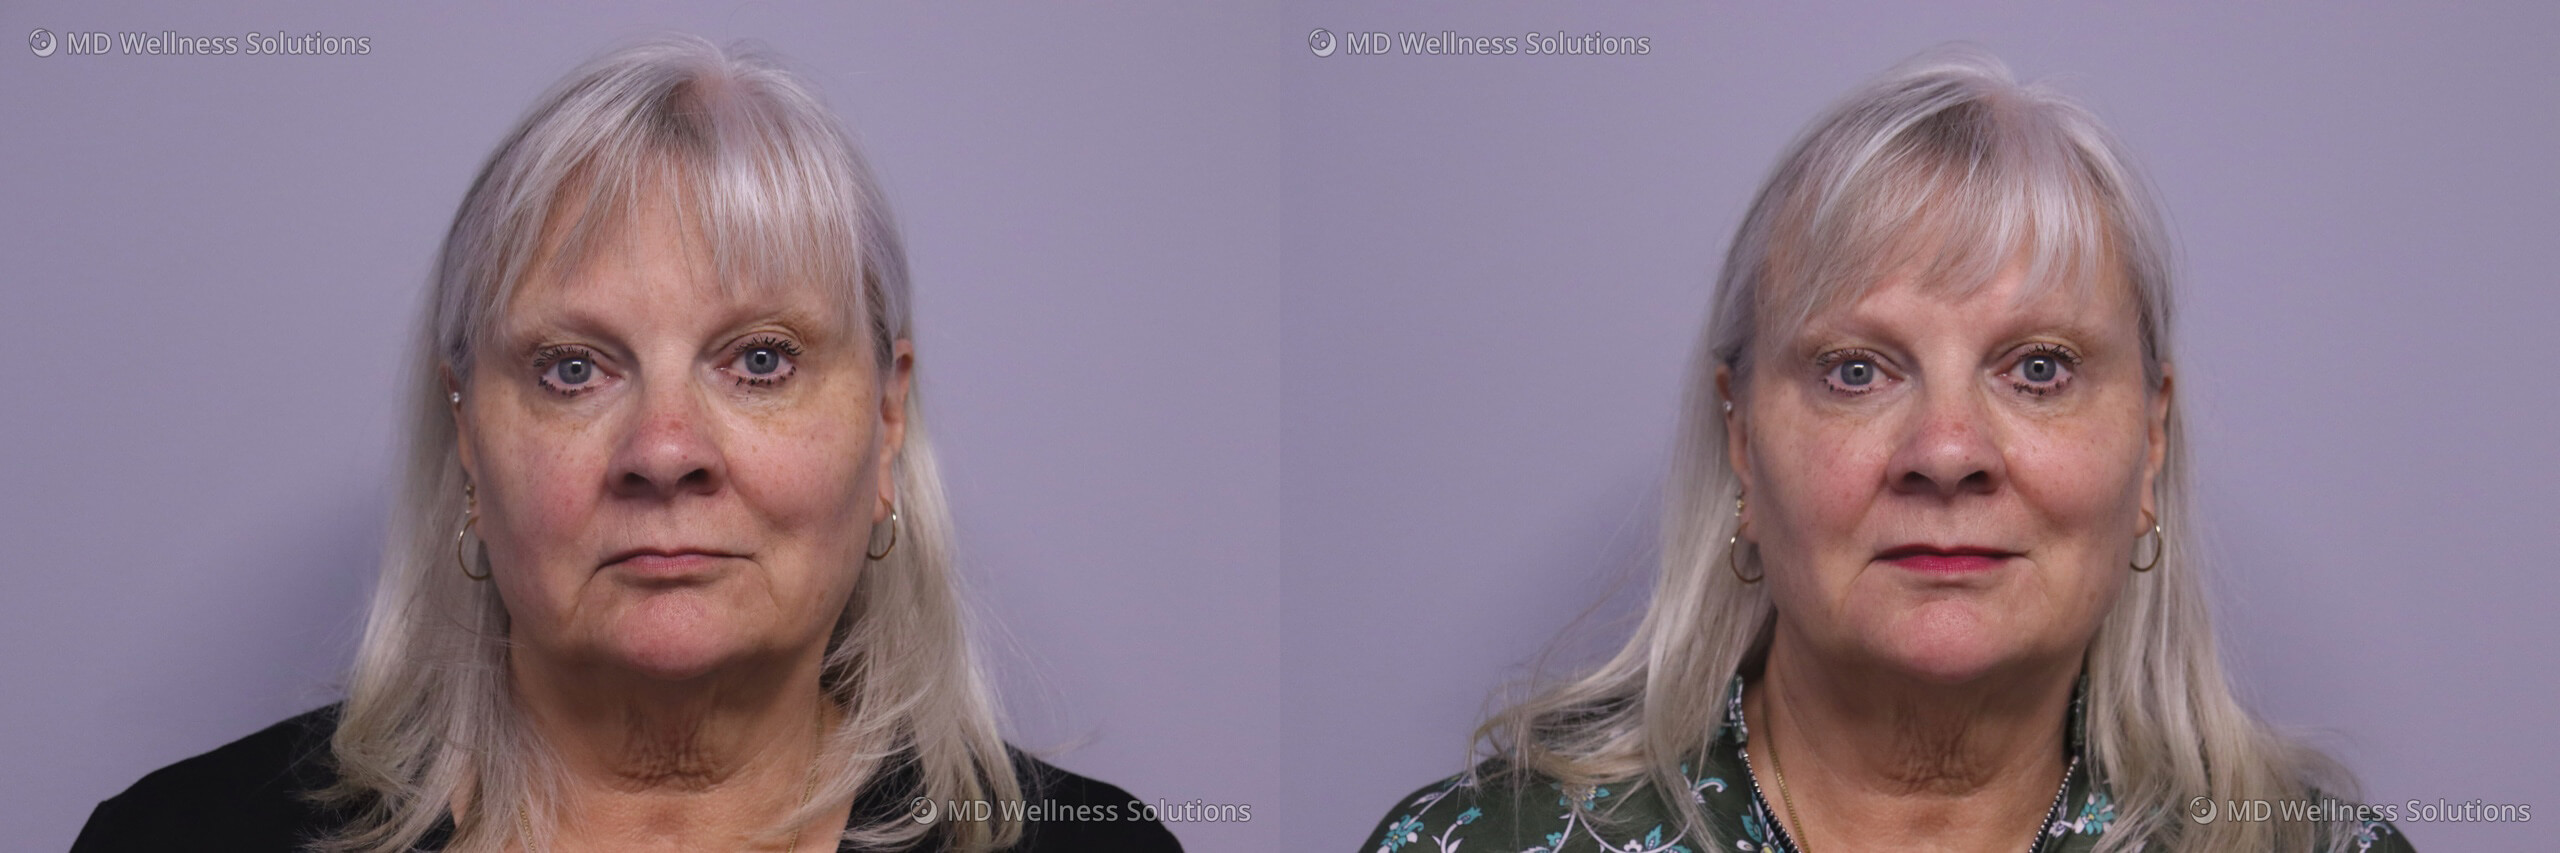 65-74 year old woman before and after Potenza radiofrequency microneedling treatment